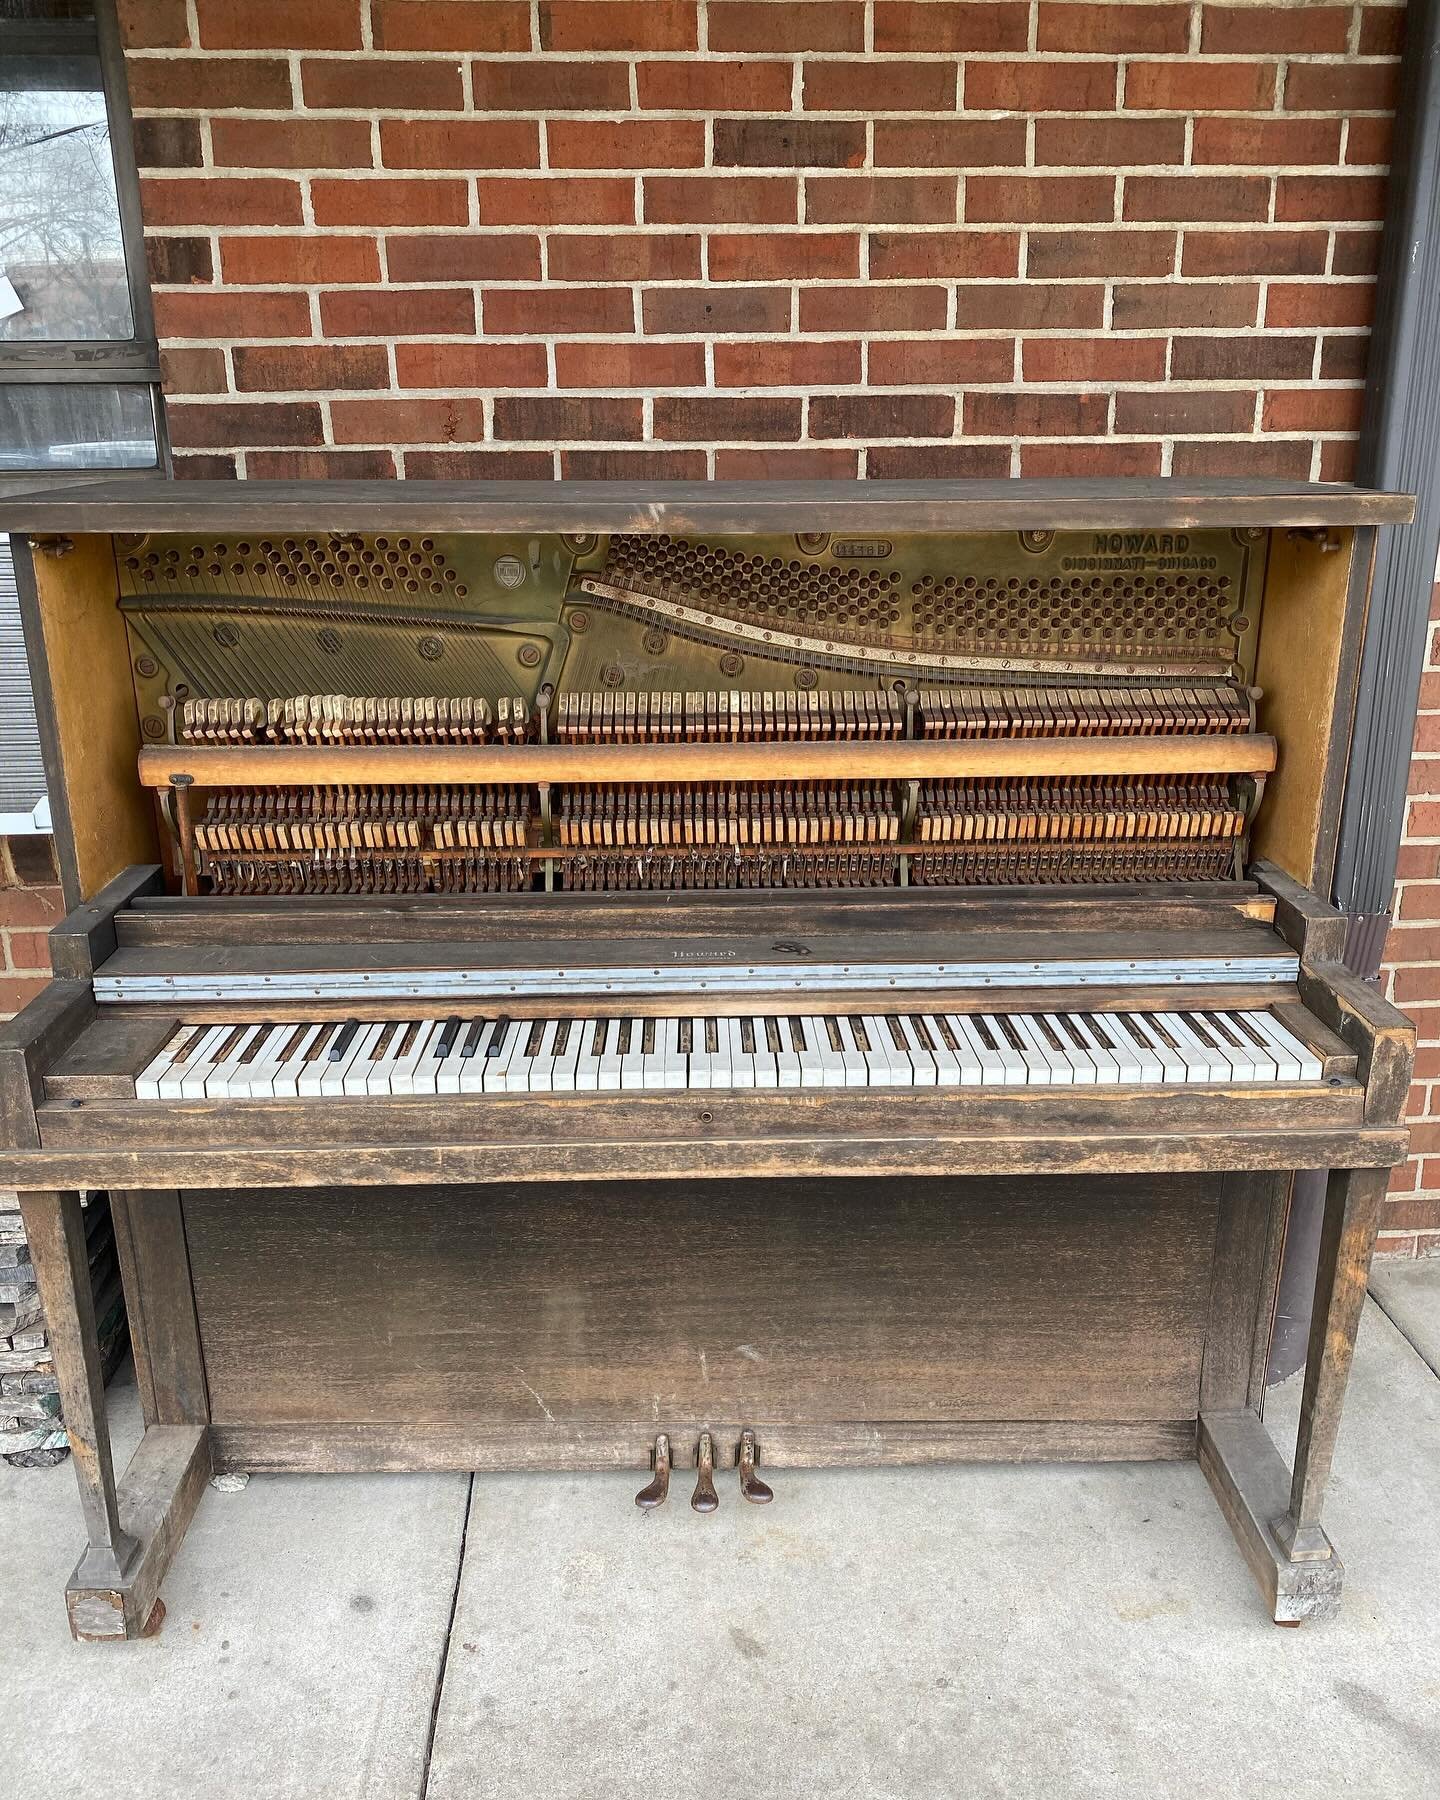 RIP to our old piano. He was not tuned and was missing half of his keys. But he could still sing a song when the right player came along. Don&rsquo;t cry just yet, because have a new piano, brought to us by @pleaseplaymepianos ! Not only is it tuned,